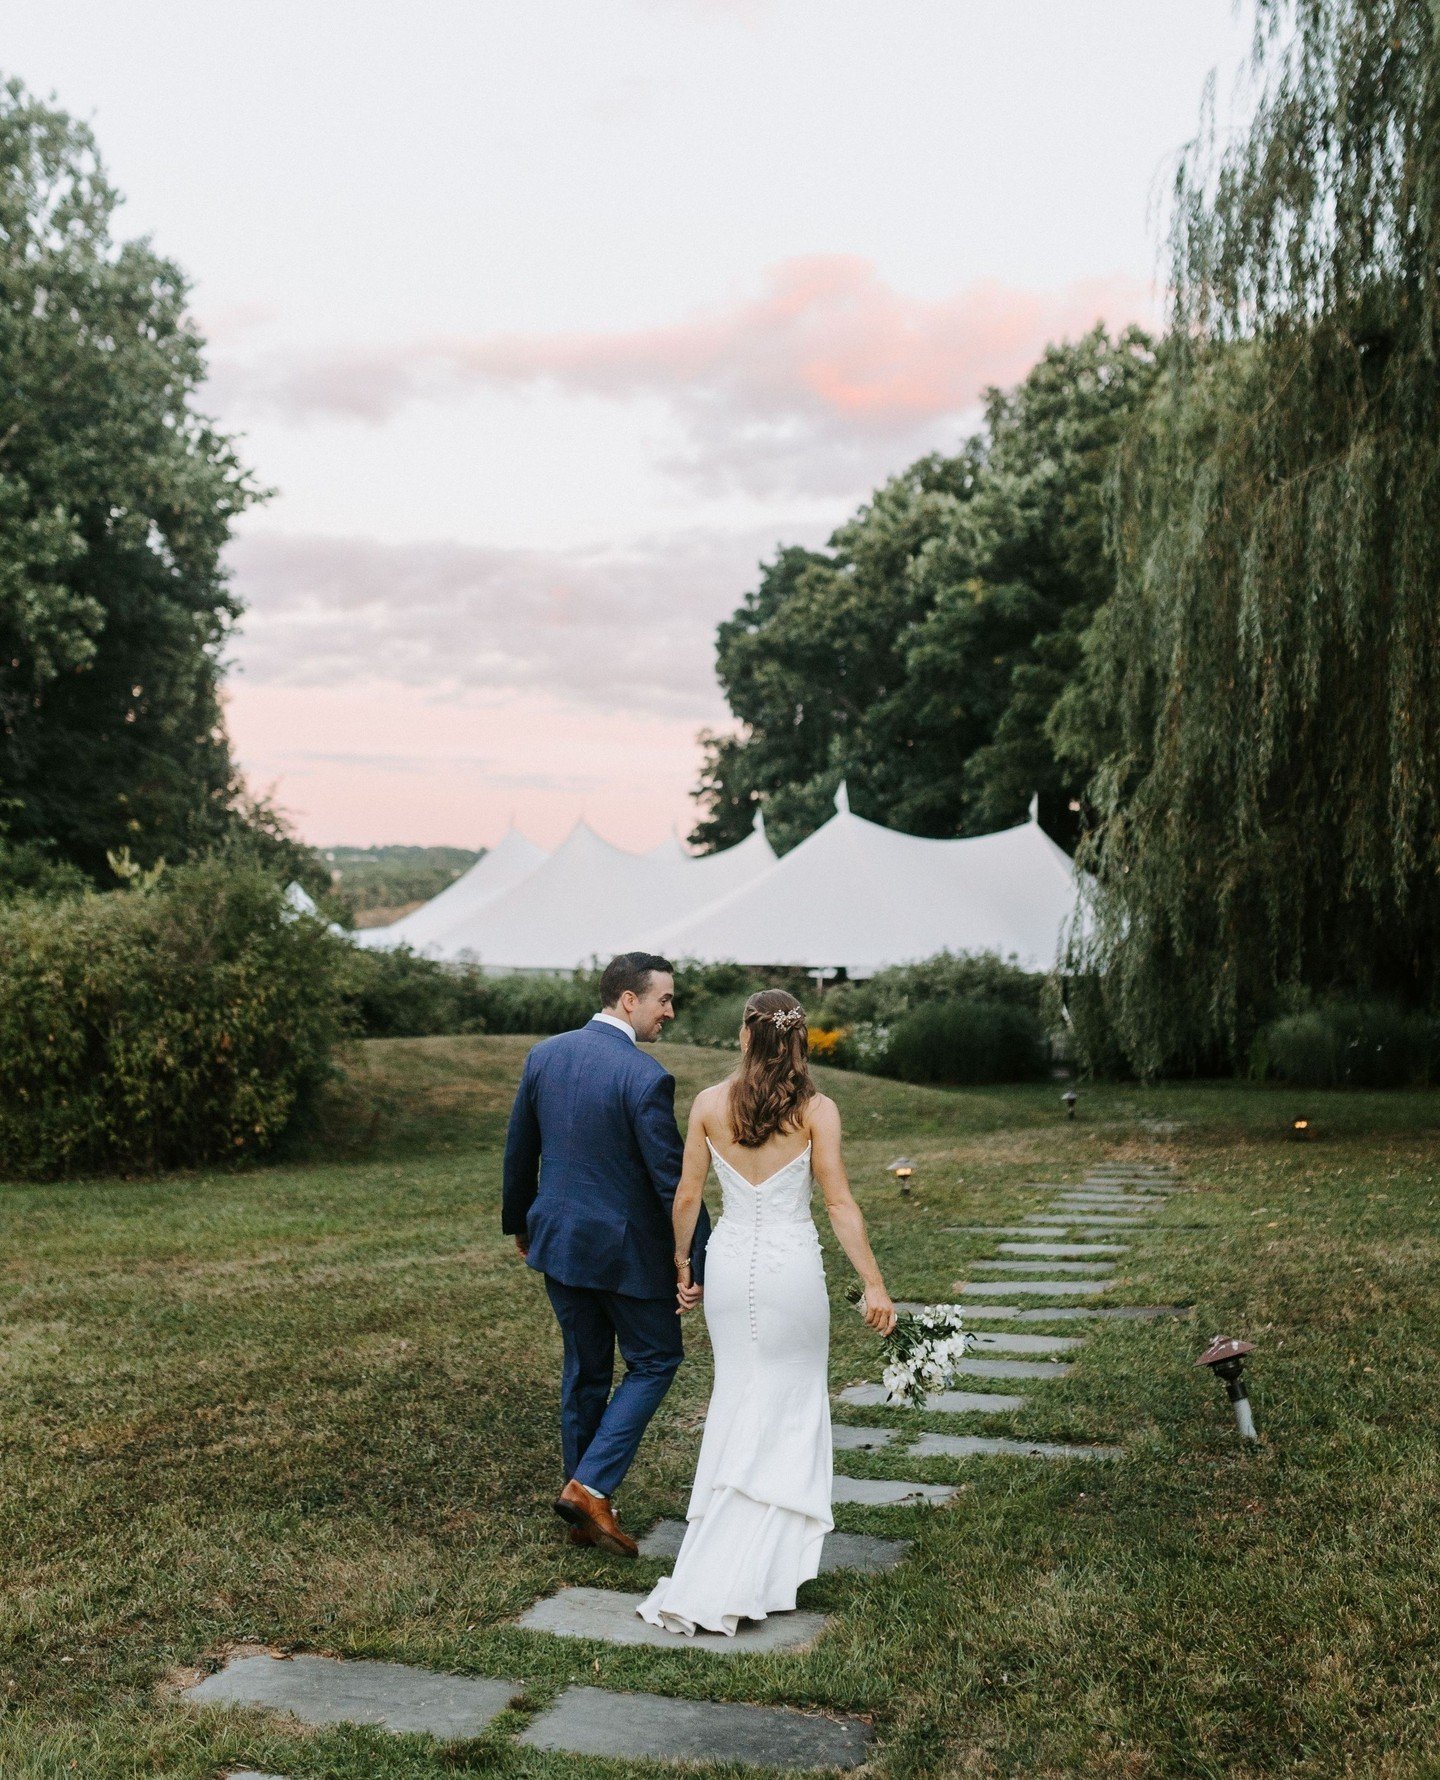 I adore Buttermilk Falls! The sunsets are breathtaking and it's a lovely getaway from the city if you want something that feels far away, but isn't a huge commute. ⁠
⁠
Planning | @aniwolff_ ⁠
Clients | @blabigailglerum⁠
Venue | @buttermilkfallsny⁠
Ph